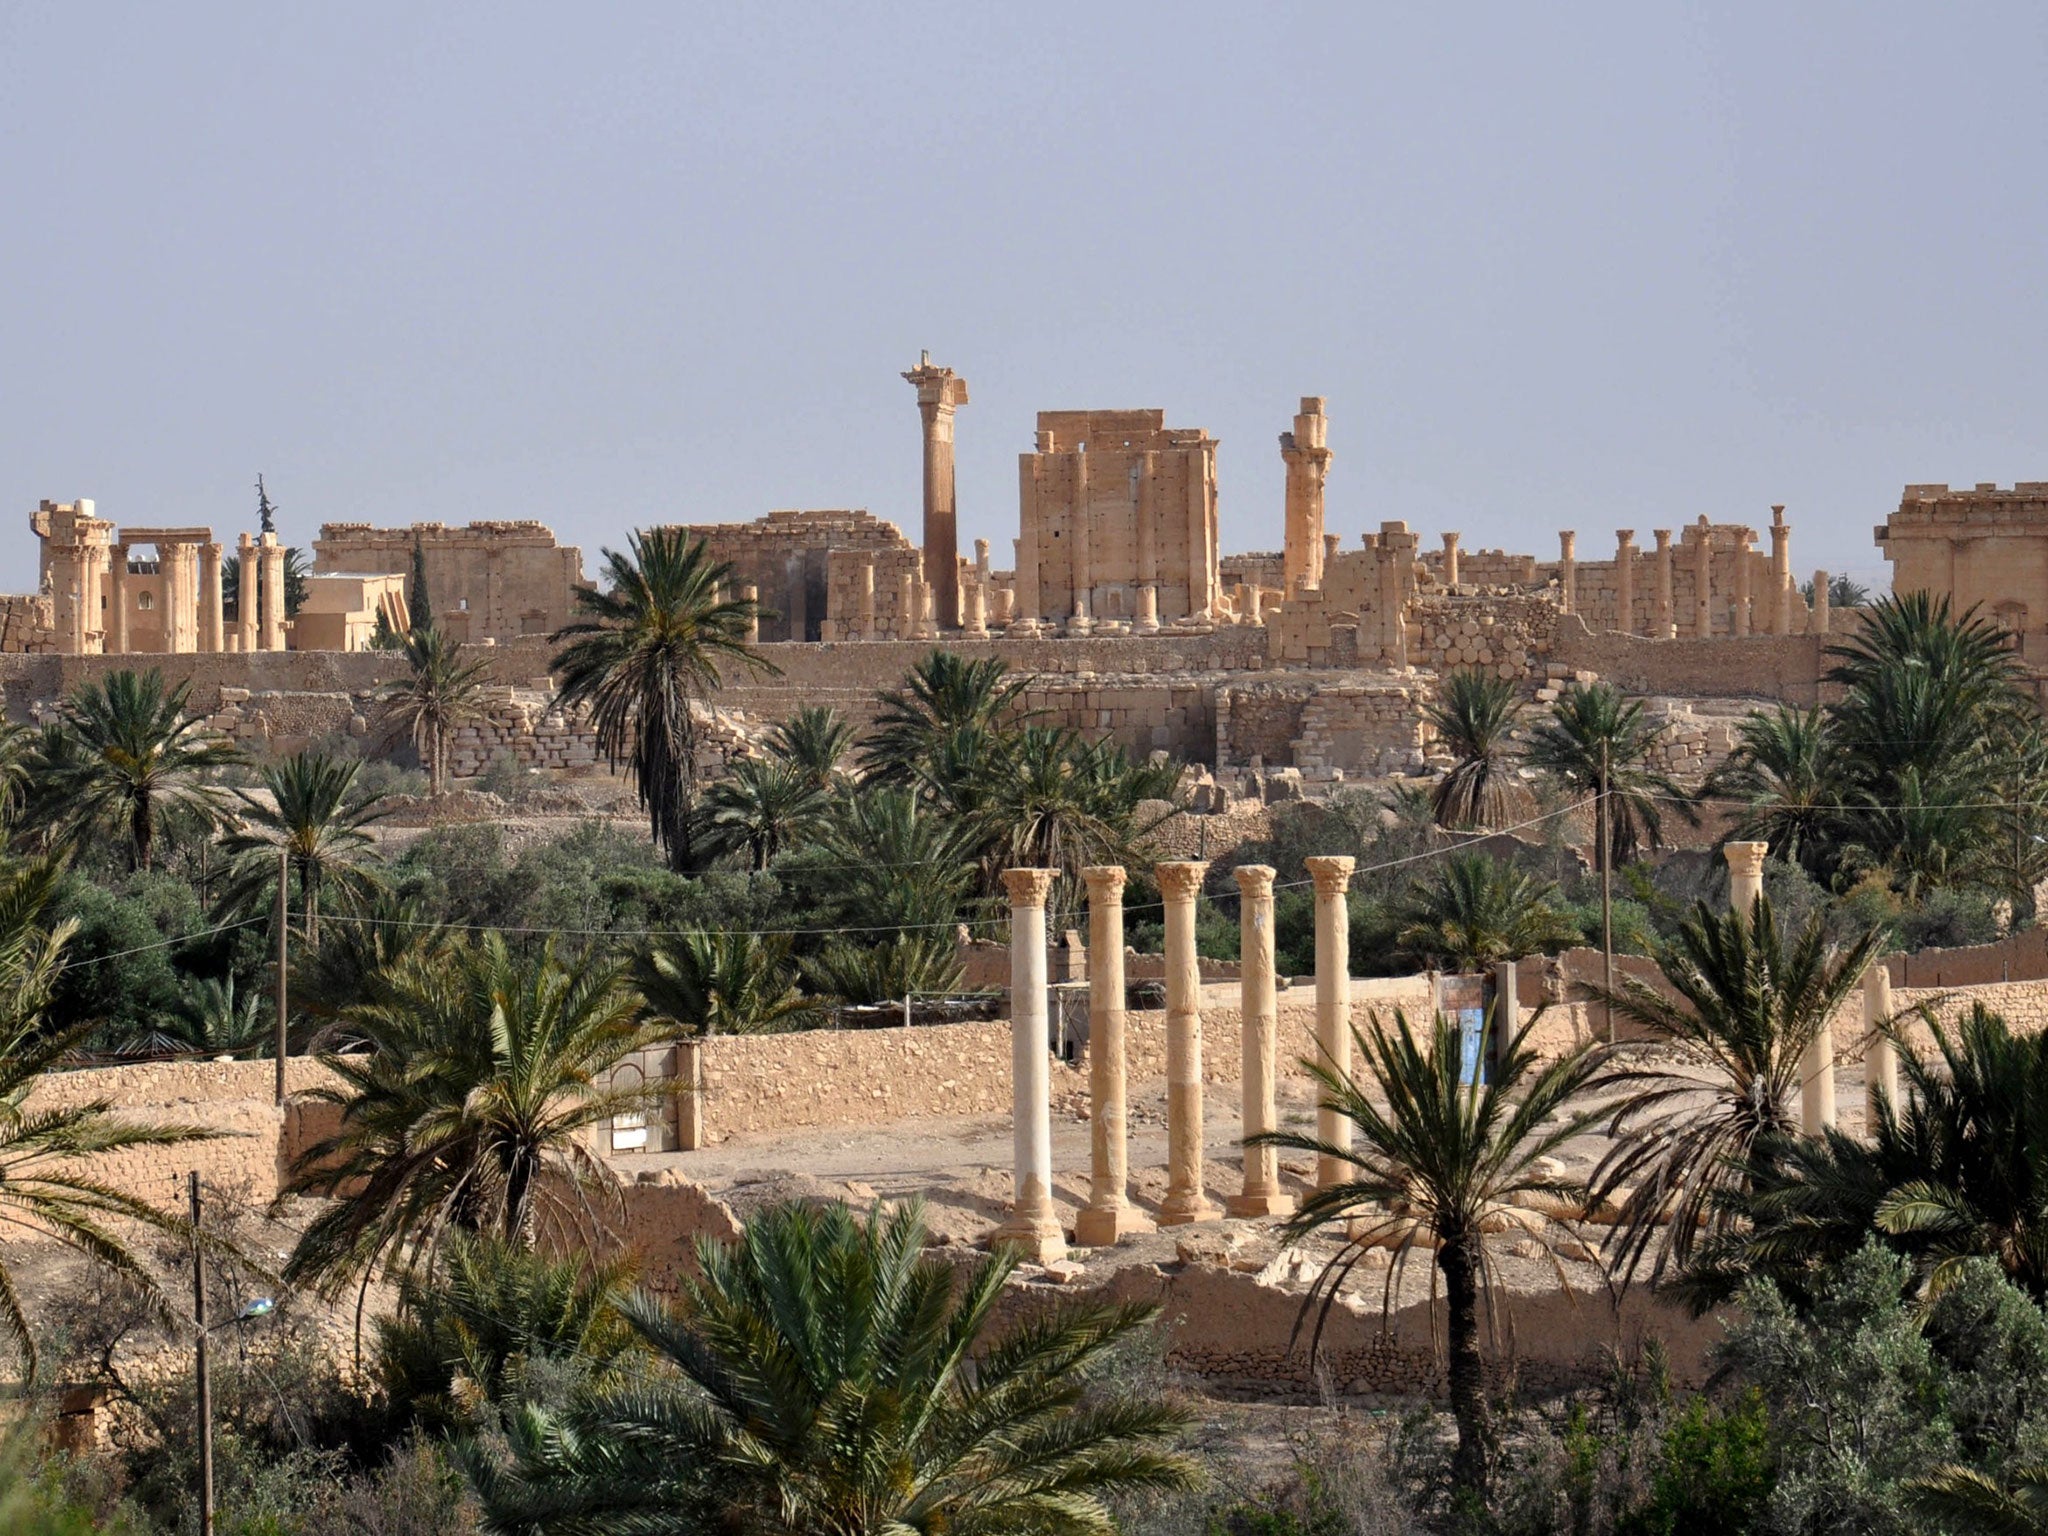 A view of the ancient Syrian city of Palmyra